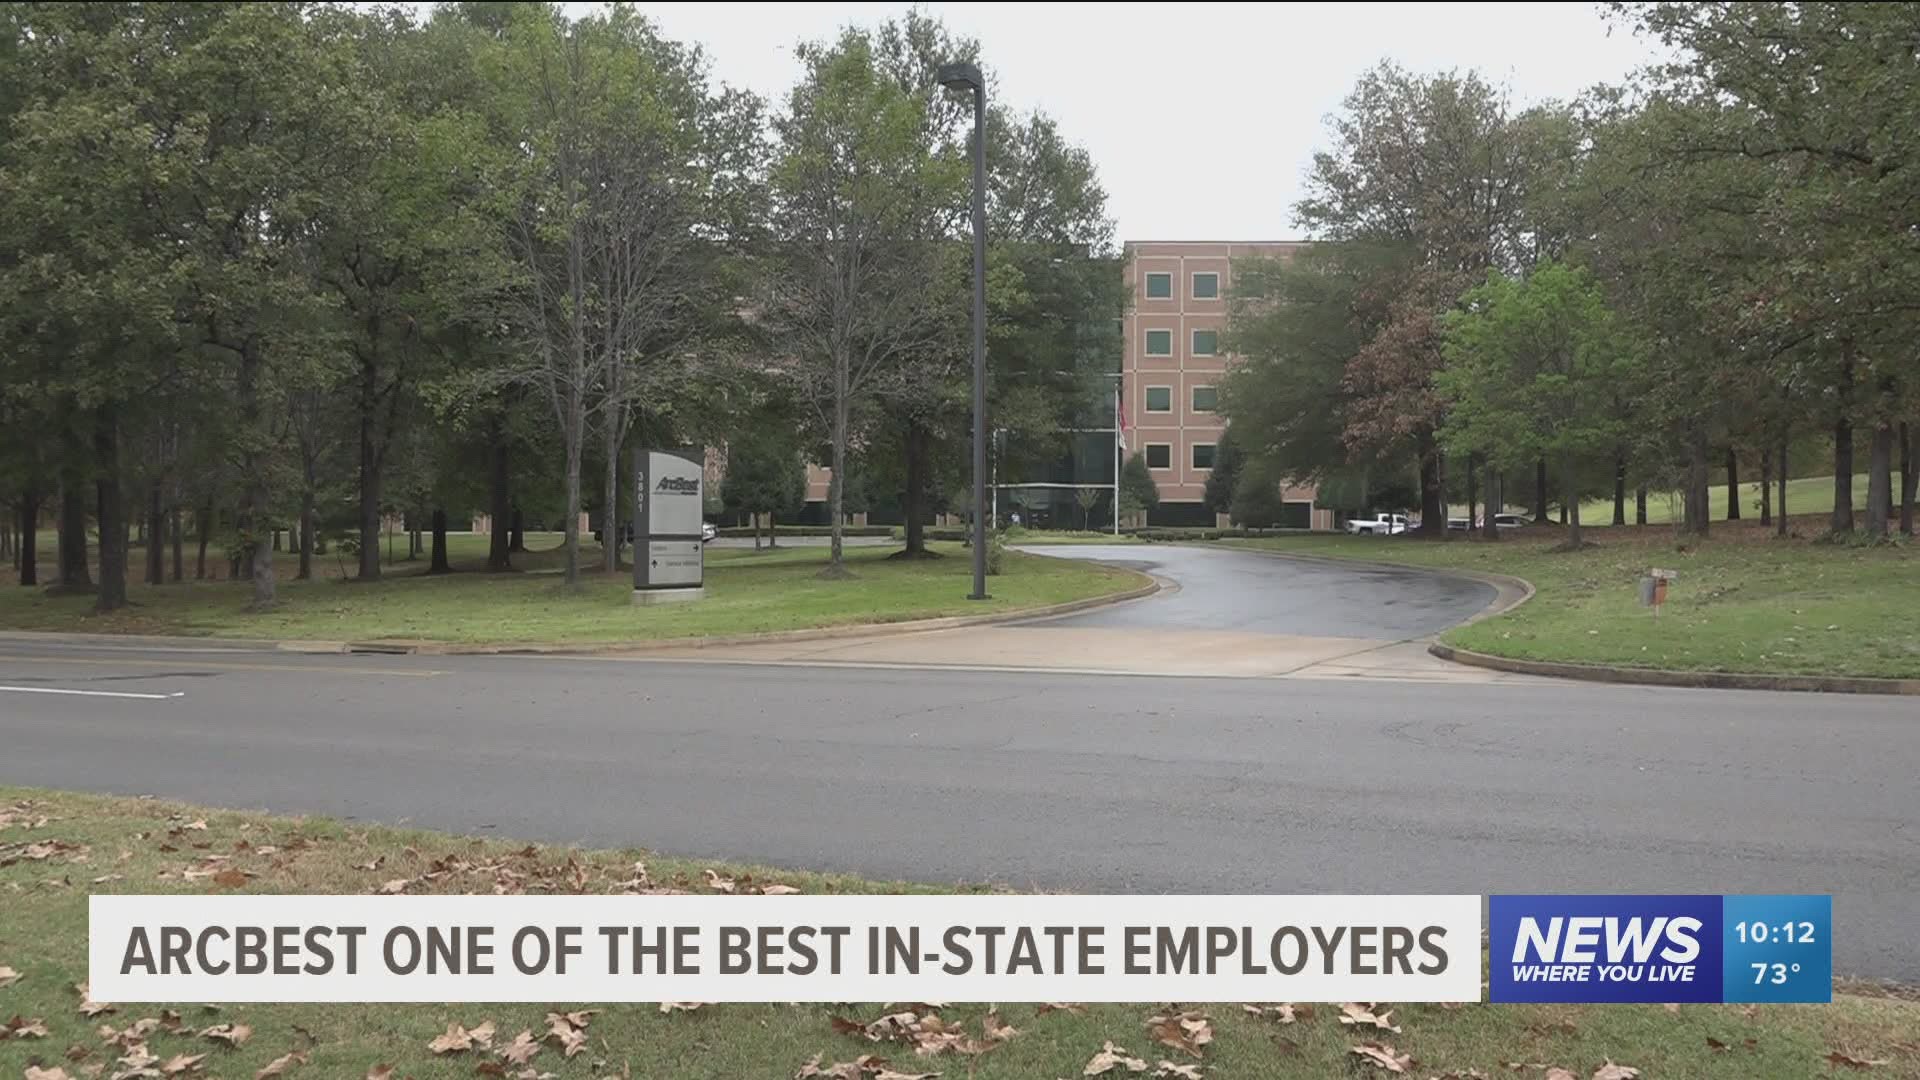 ArcBest named one of the best in-state employers by Forbes